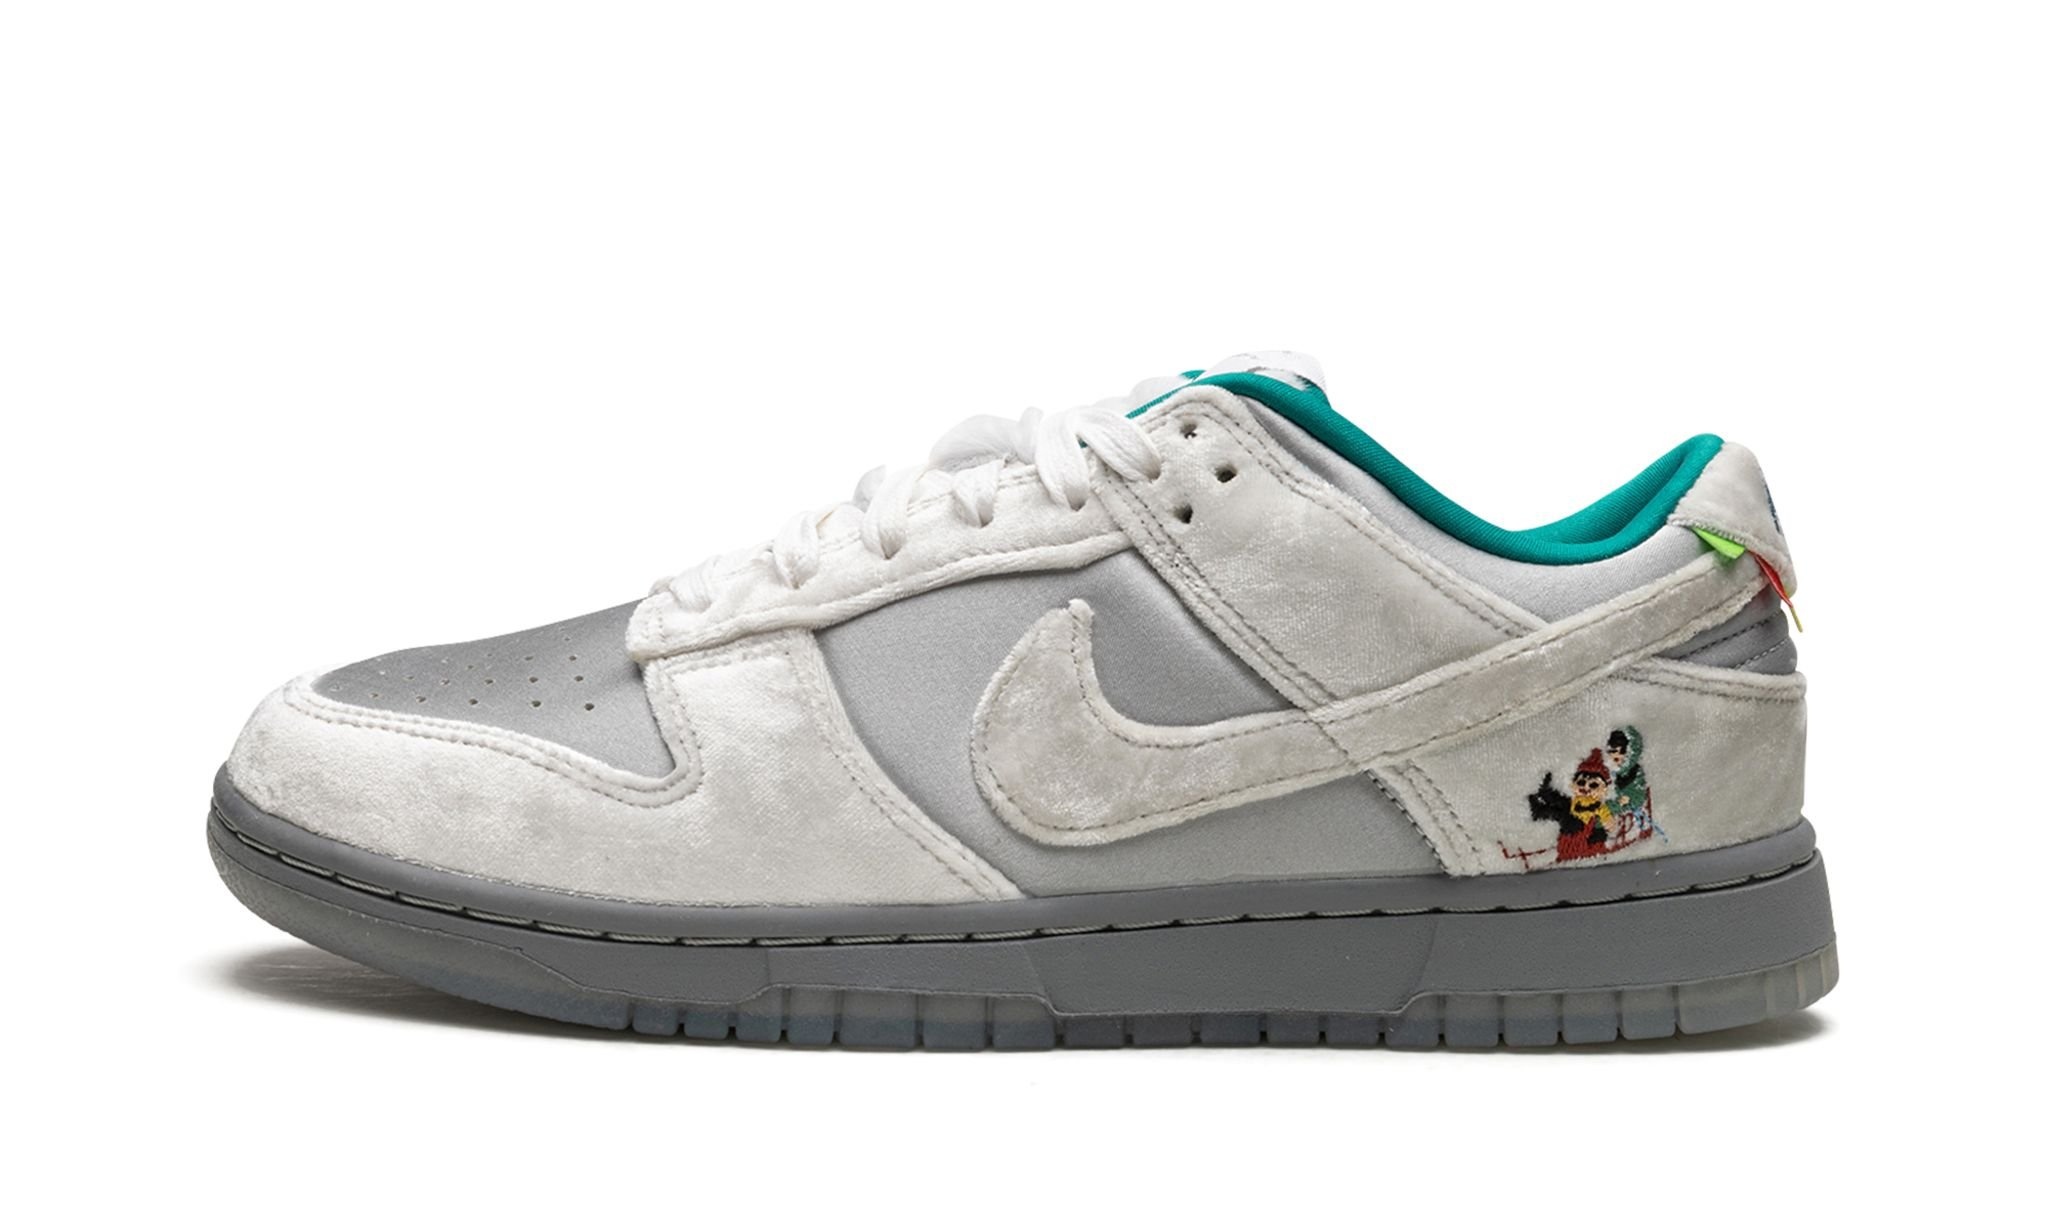 Dunk Low "Ice" - 1